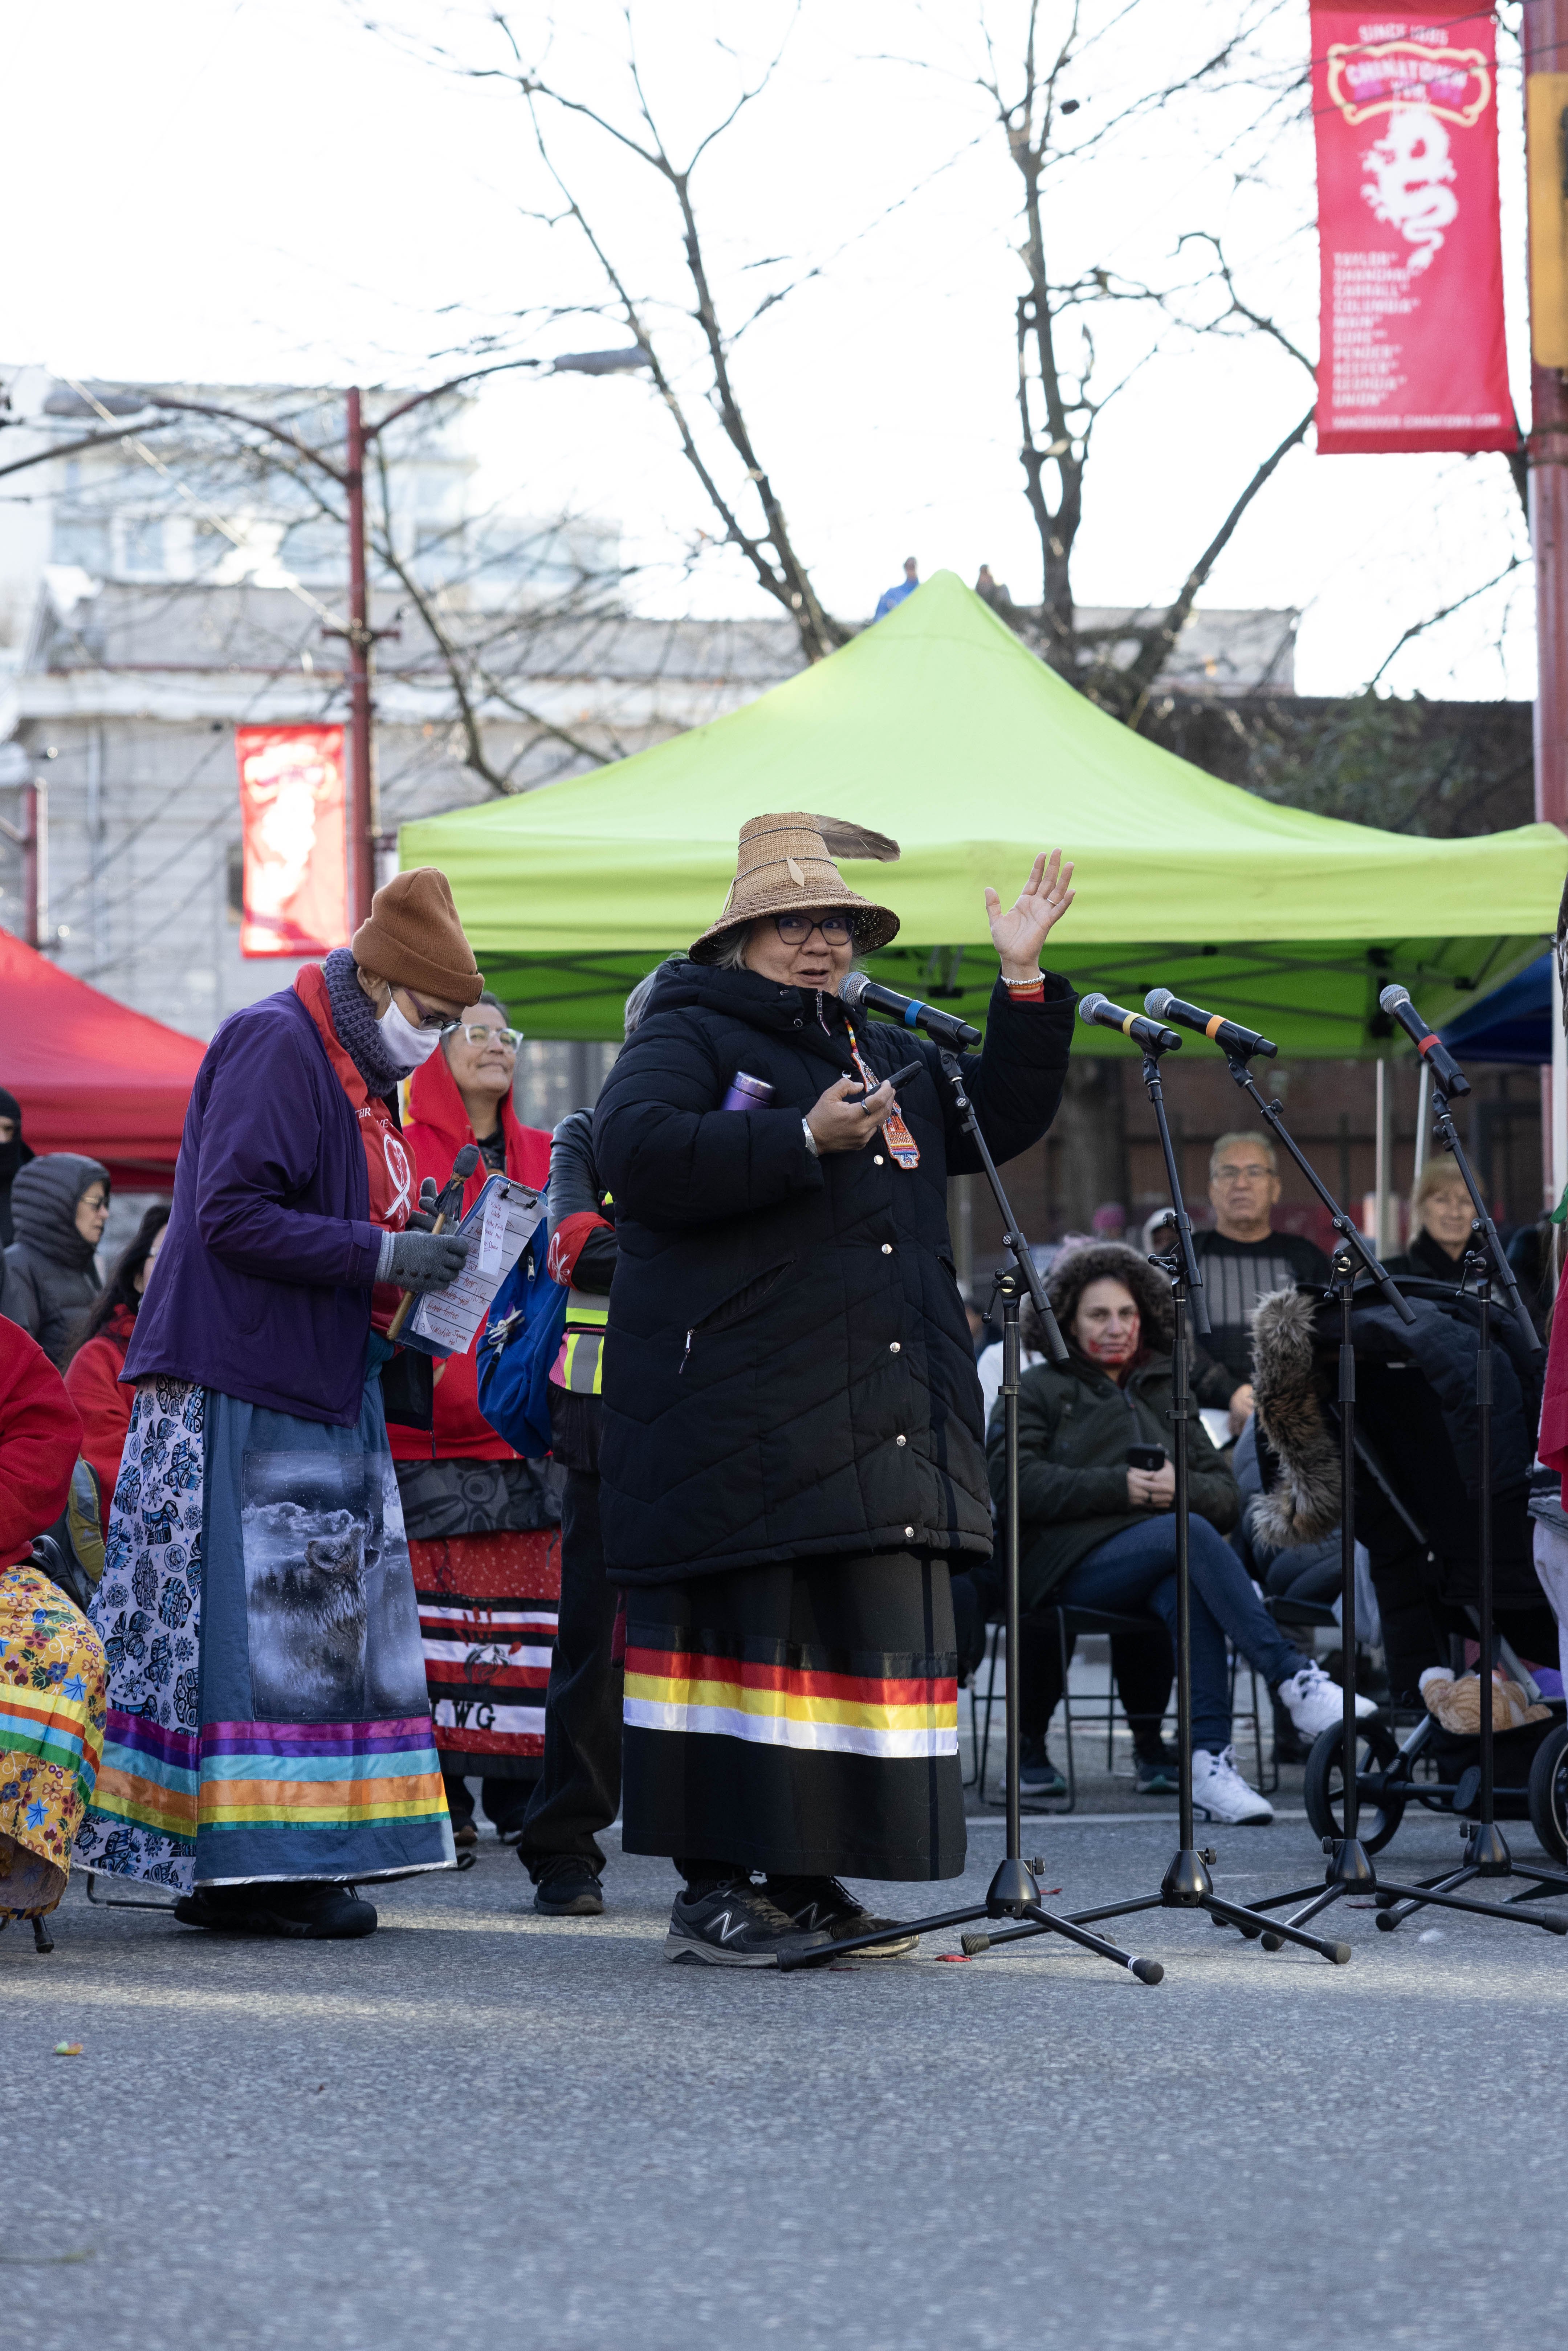 National Chief of the Assembly of First Nations RoseAnne Archibald addresses the crowd after the march.